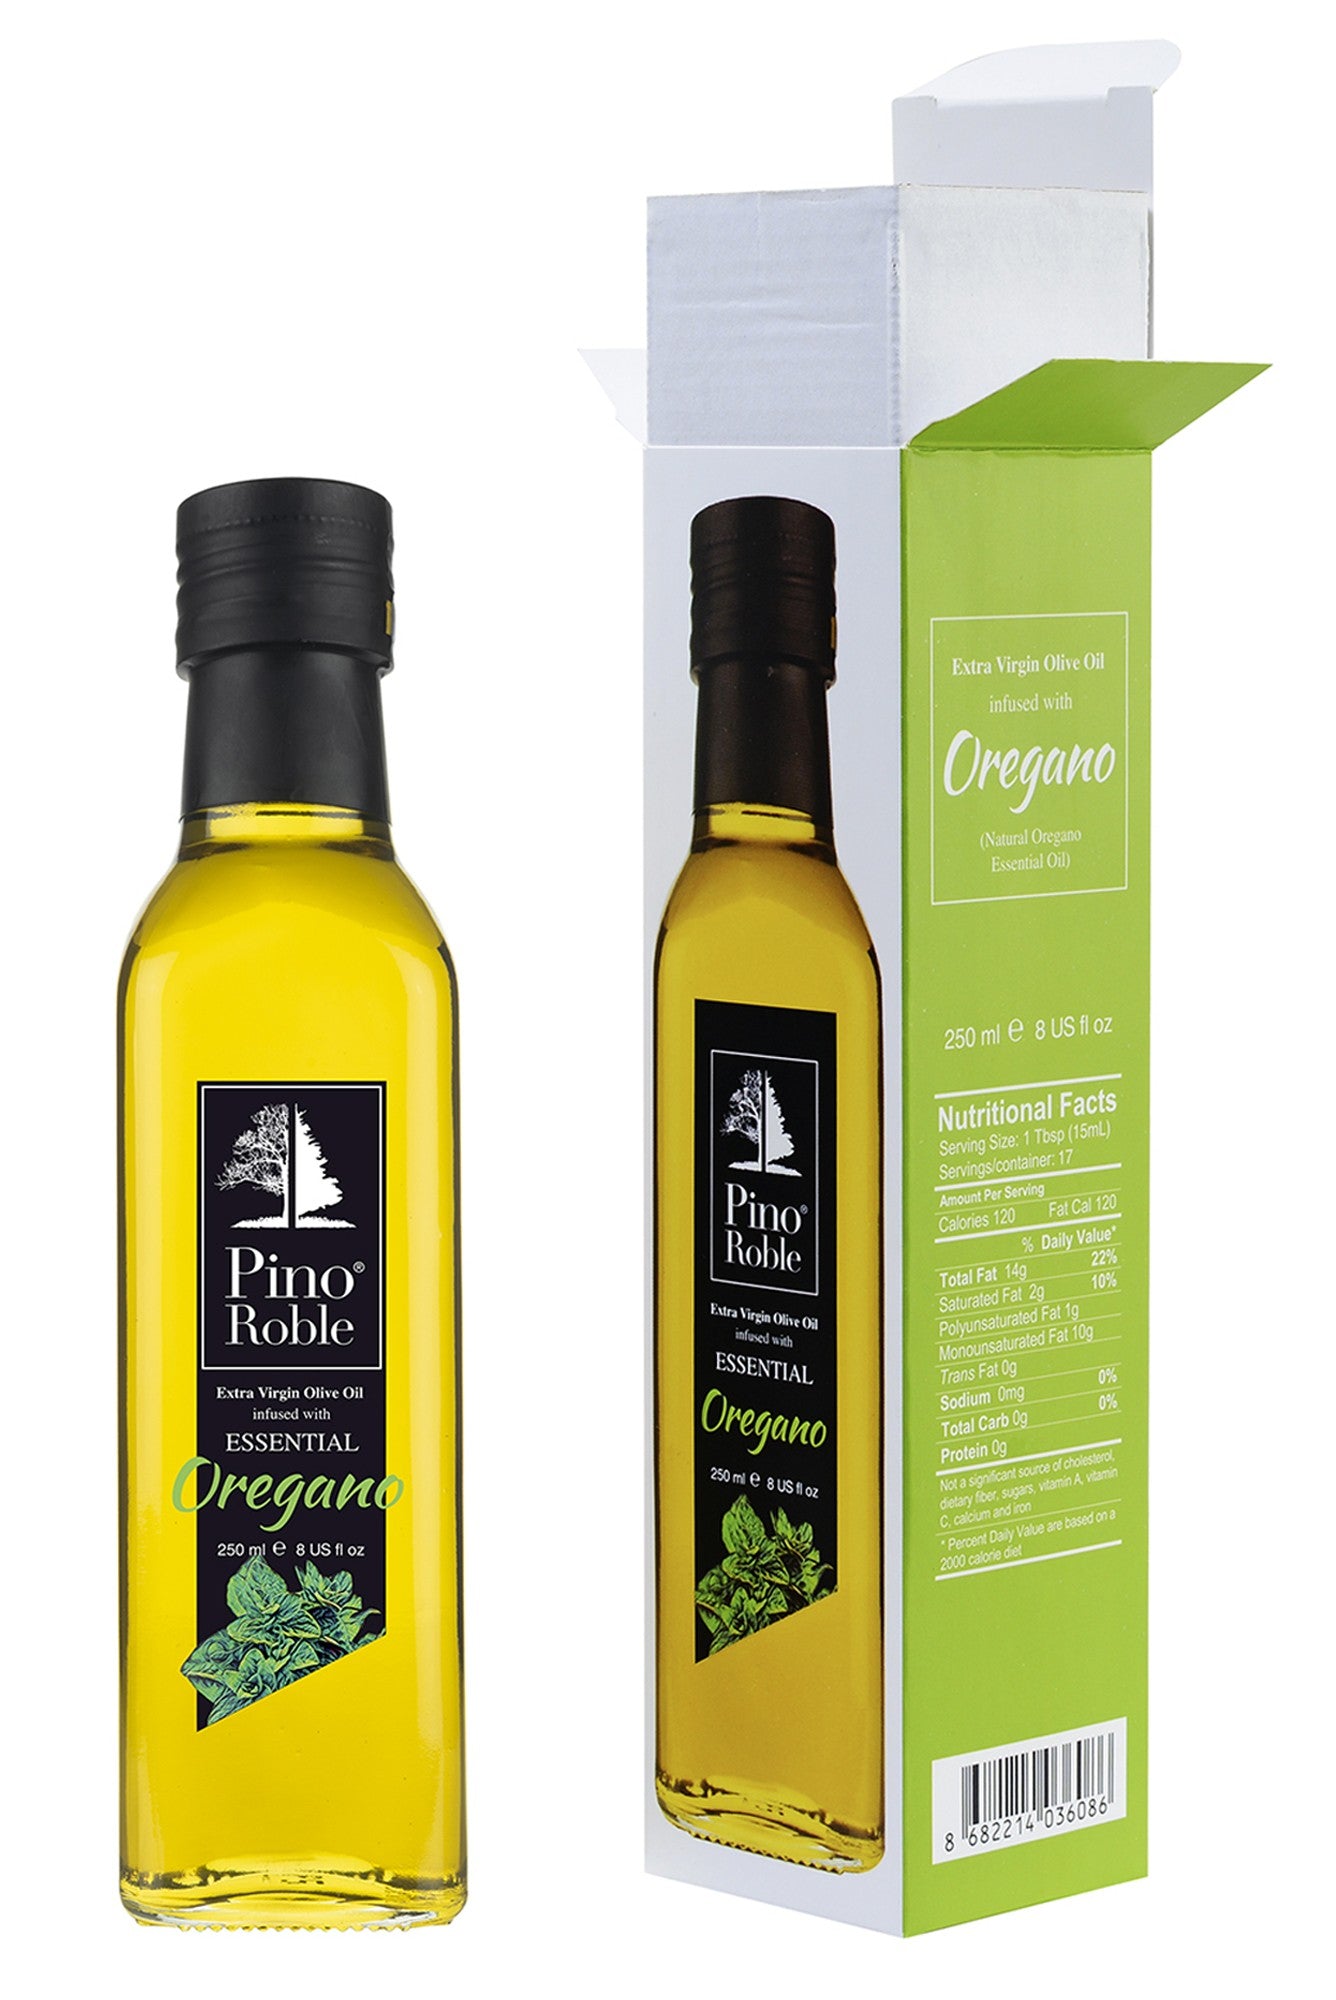 PinoRoble Extra Virgin Olive Oil Infused with Oregano 8 fl Oz